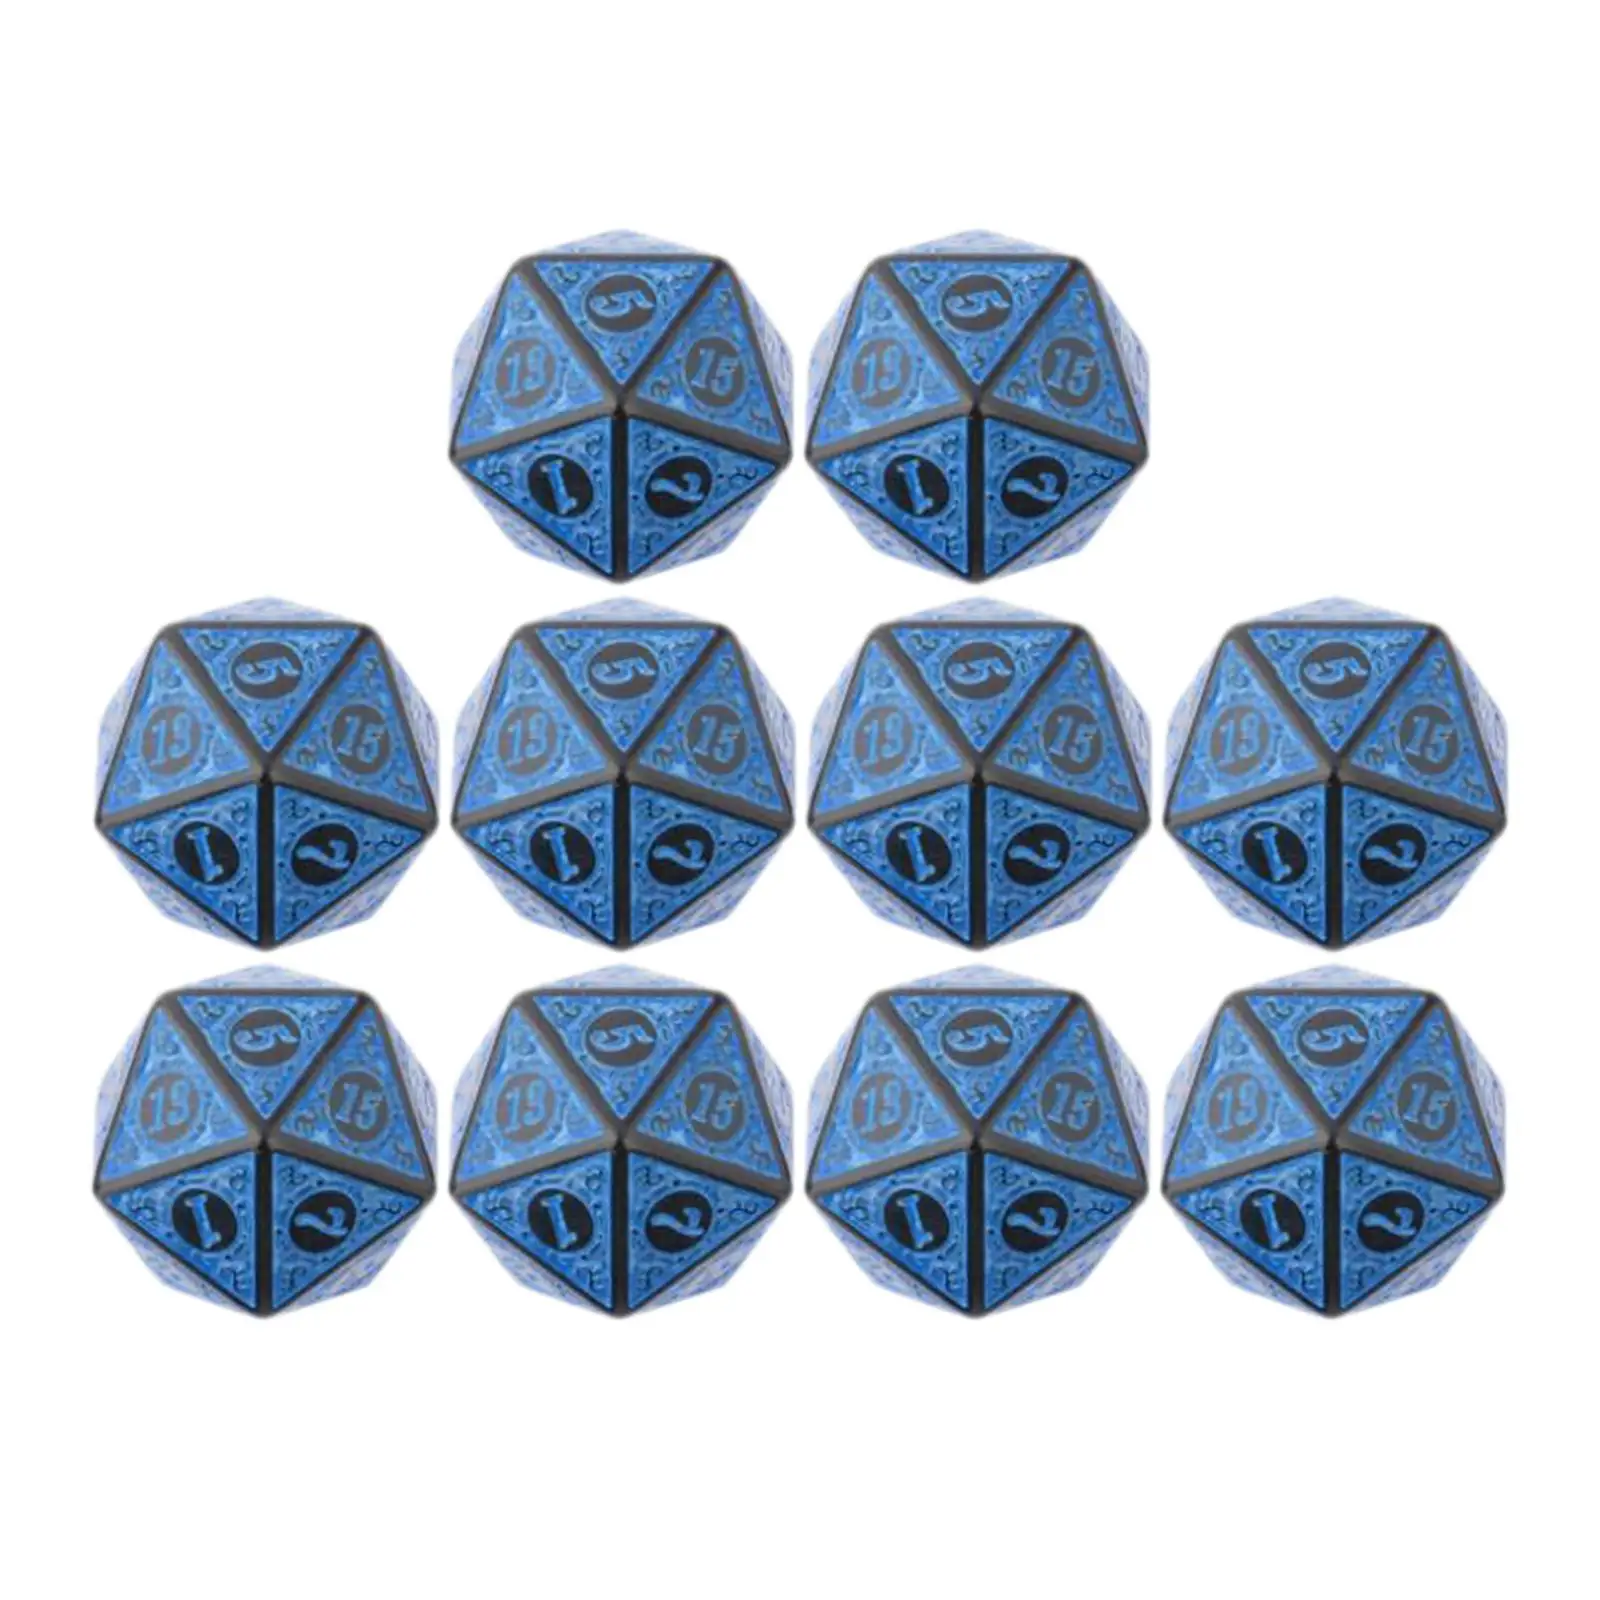 20 Sided Polyhedral Dice 10 Pieces Dice Set English Letters Acrylic Unique 20 mm for Dice Games Roleplaying Party Game